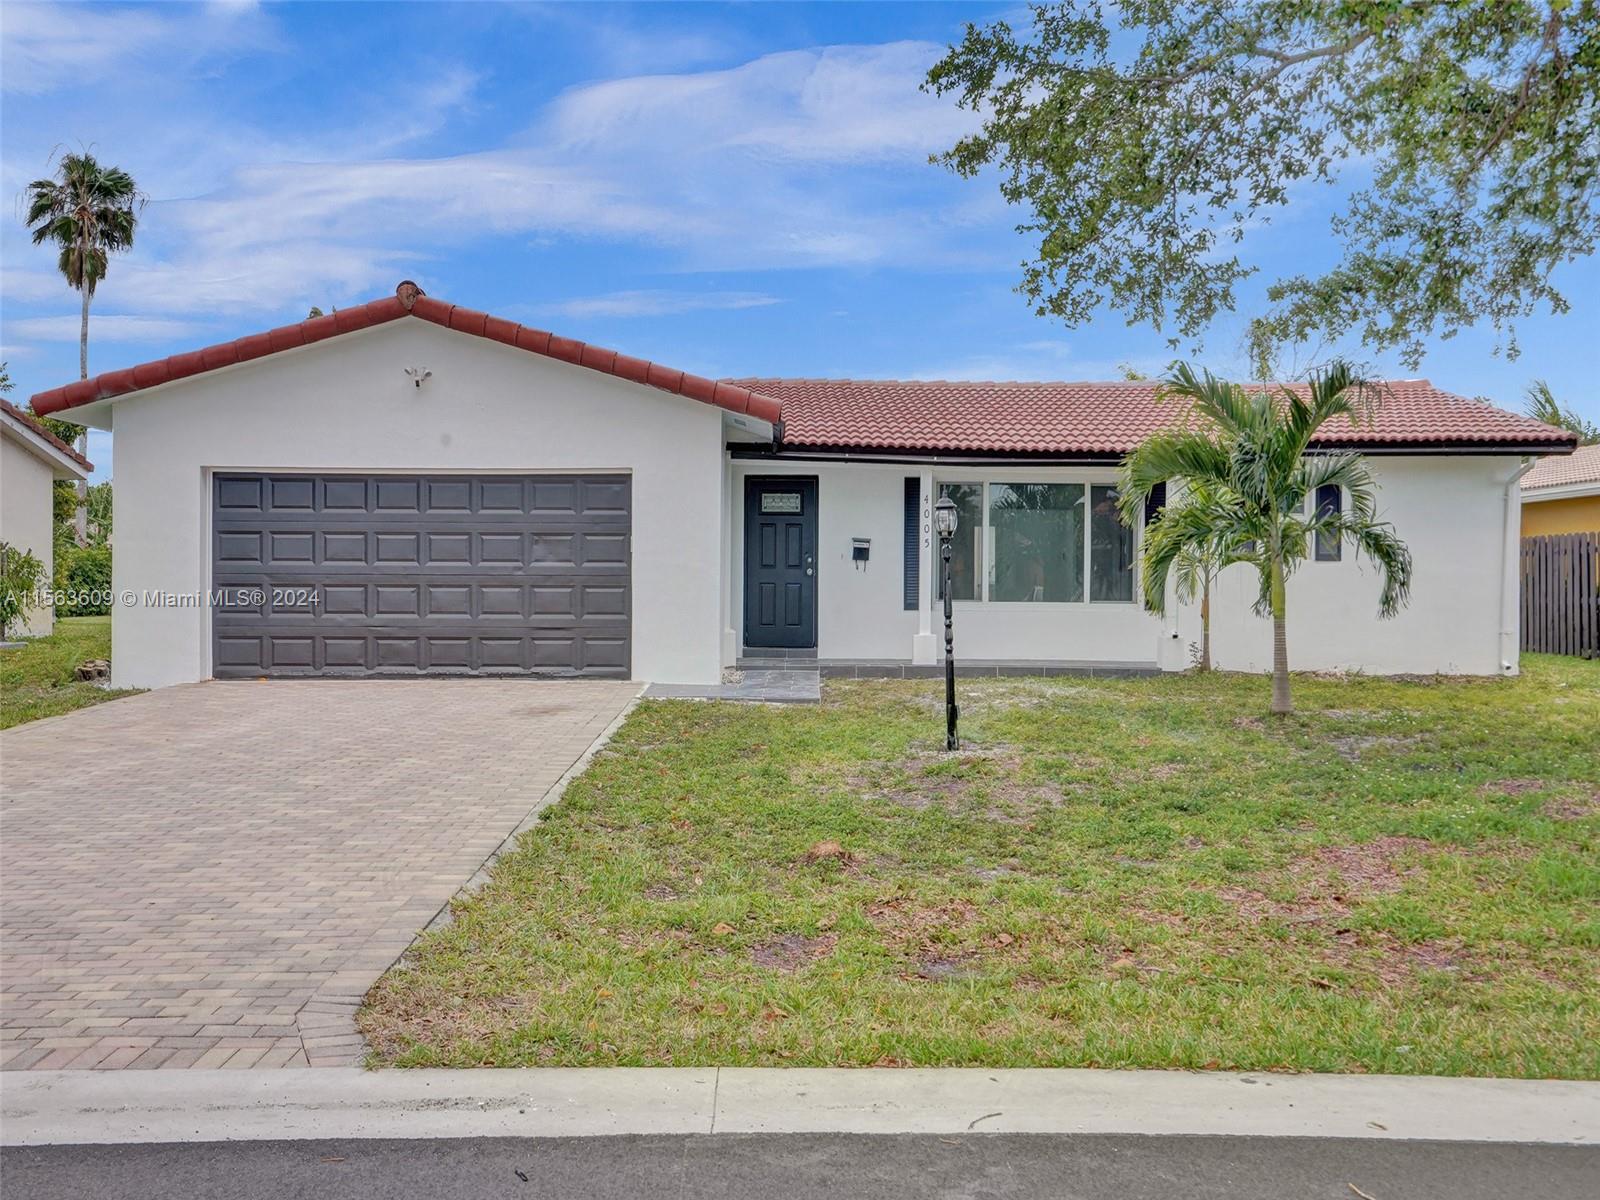 4005 Nw 76th Ave, Coral Springs, Broward County, Florida - 4 Bedrooms  
2 Bathrooms - 